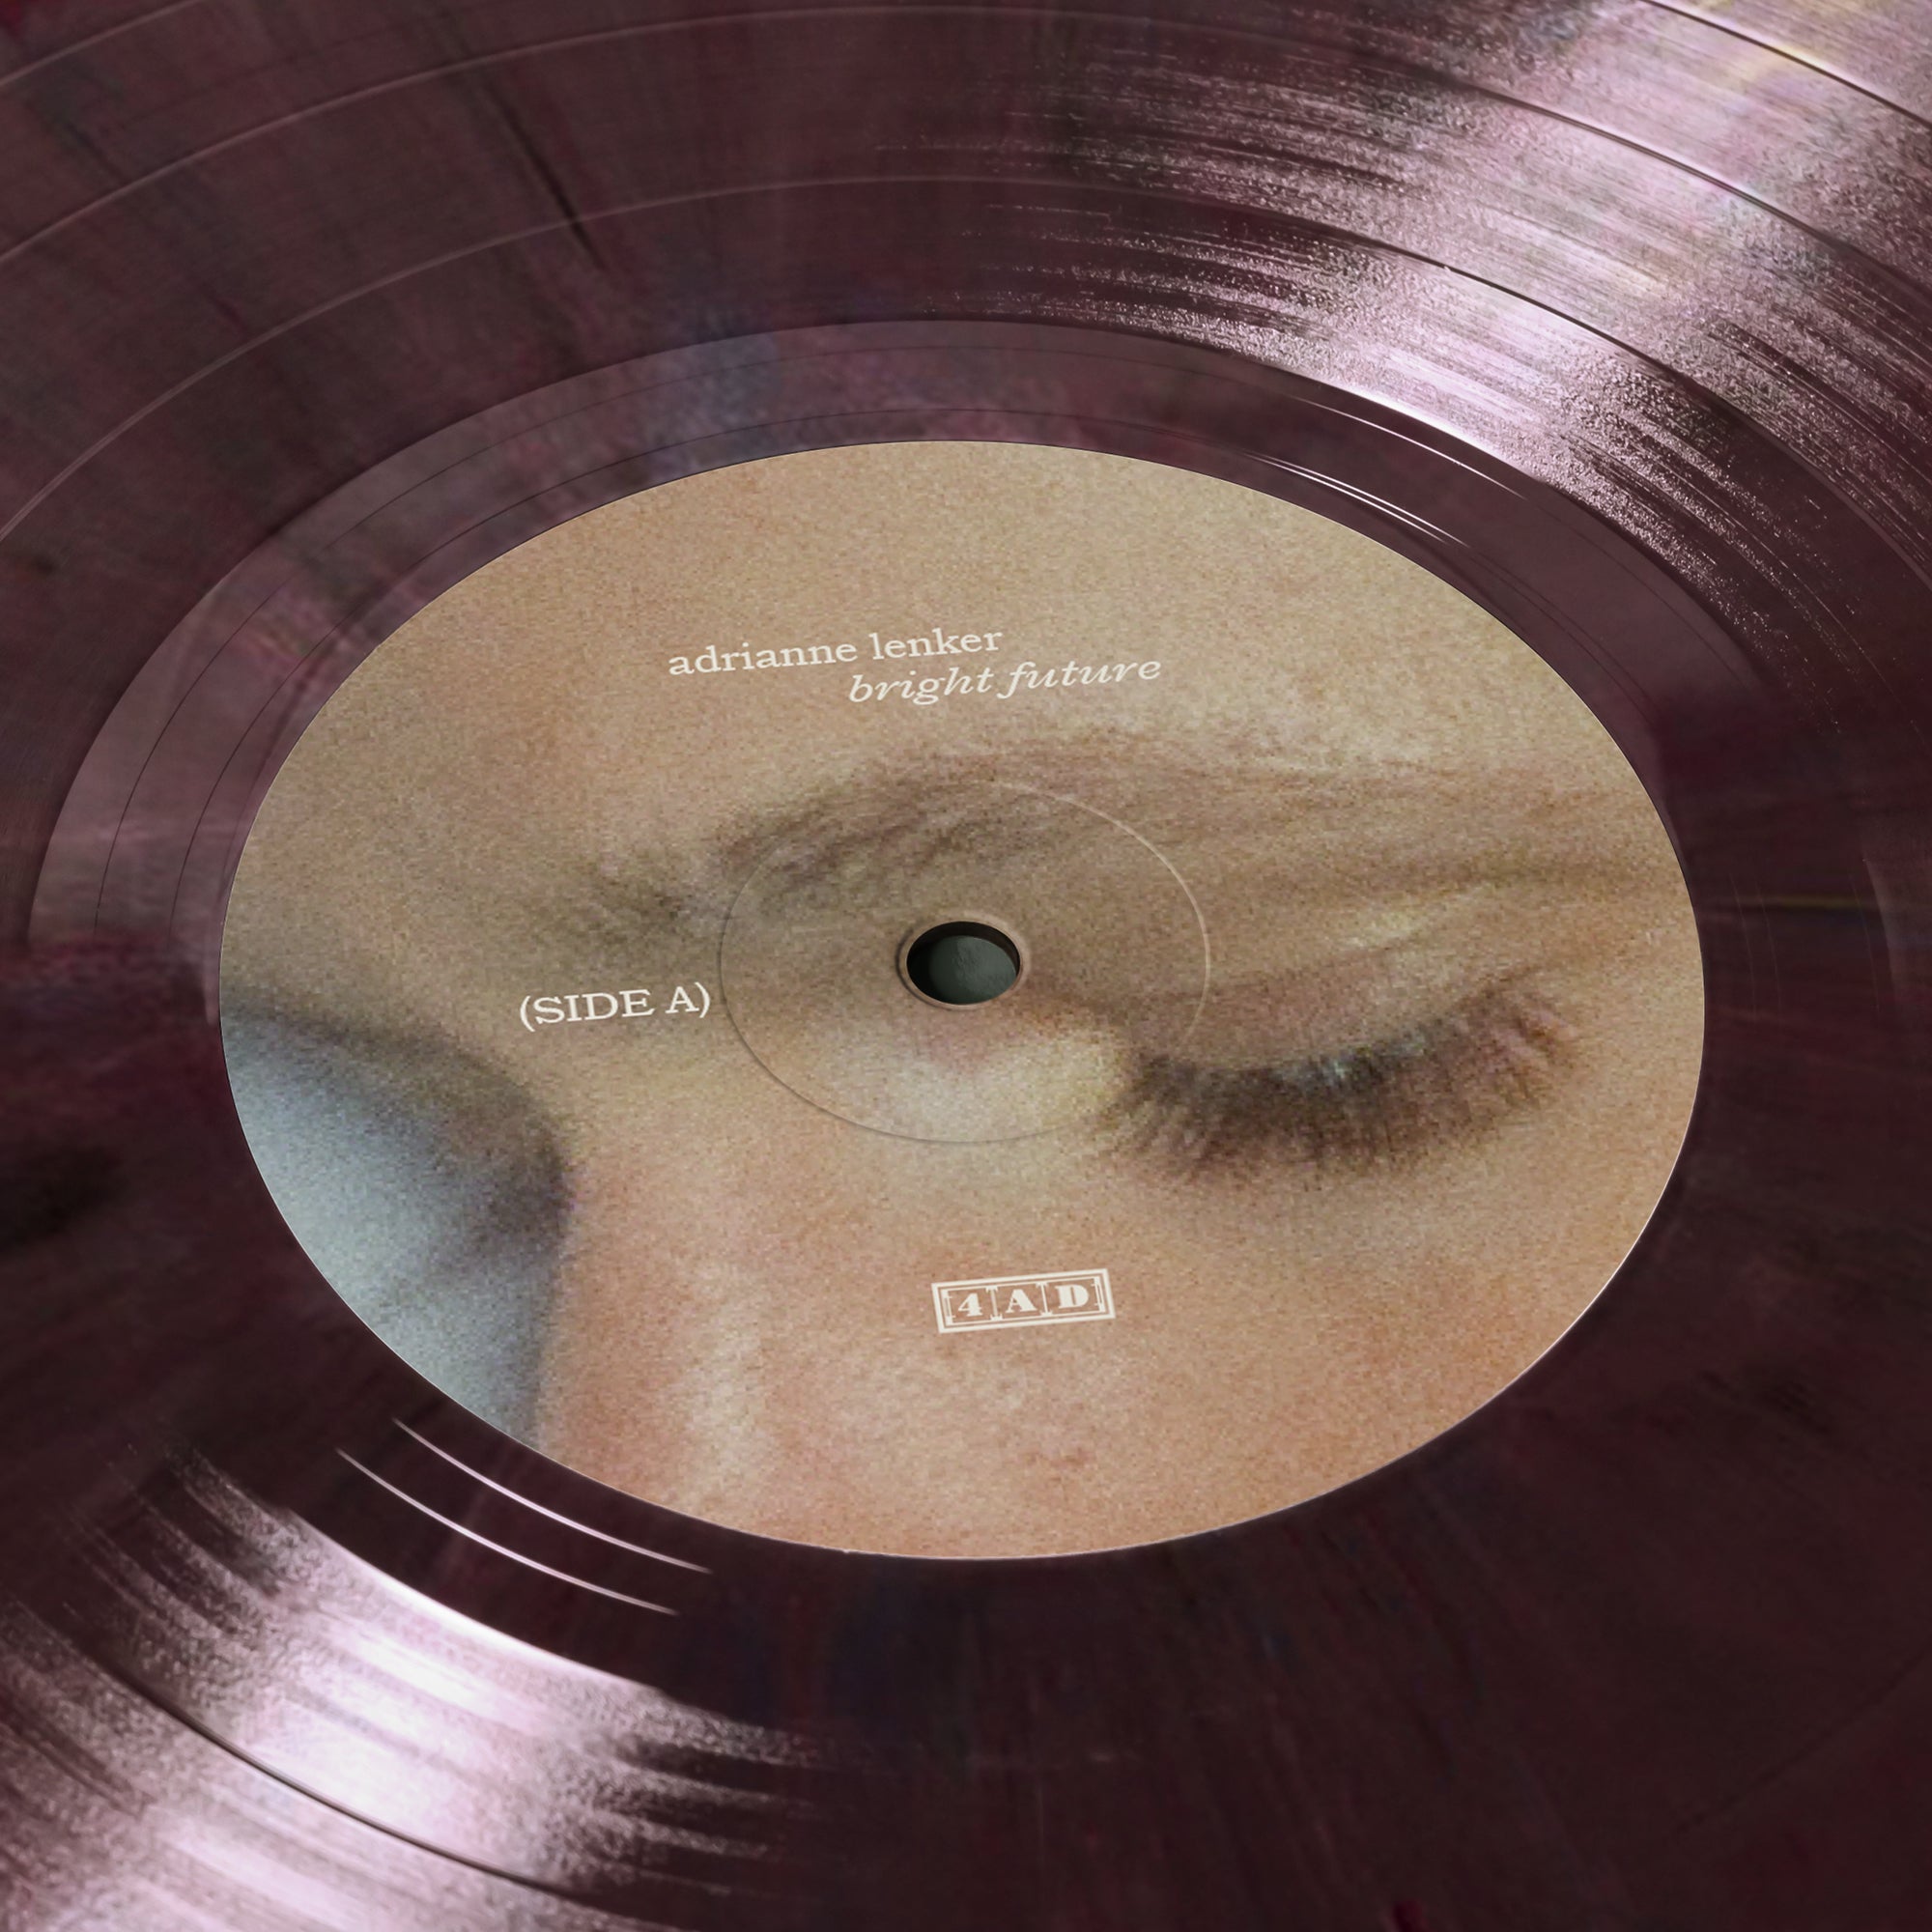 Adrianne Lenker - Bright Future: Limited Recycled Vinyl LP